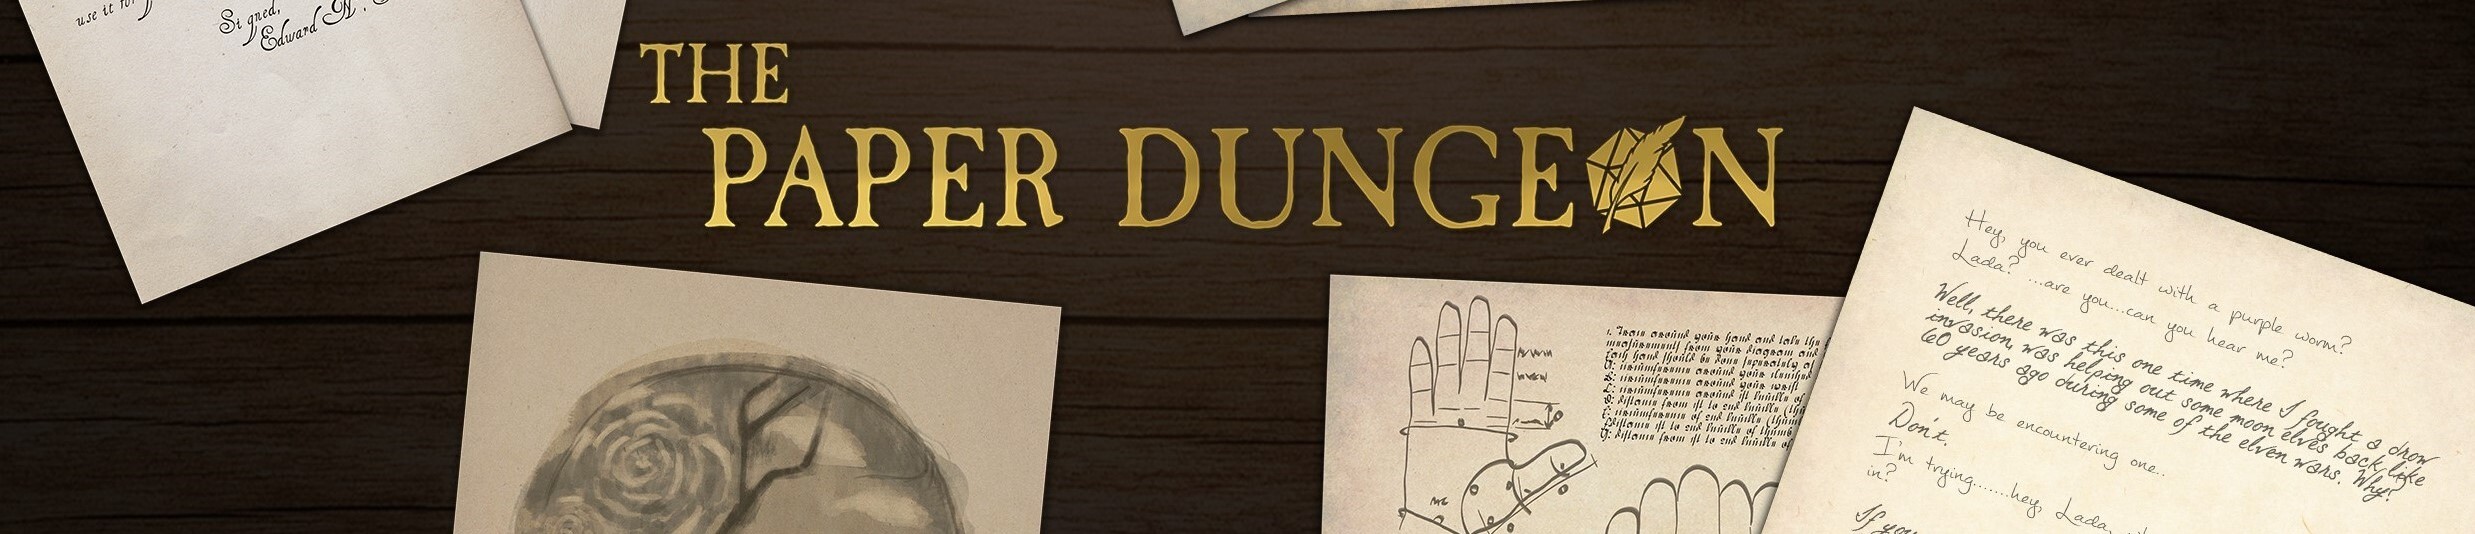 The Paper Dungeon Podcast